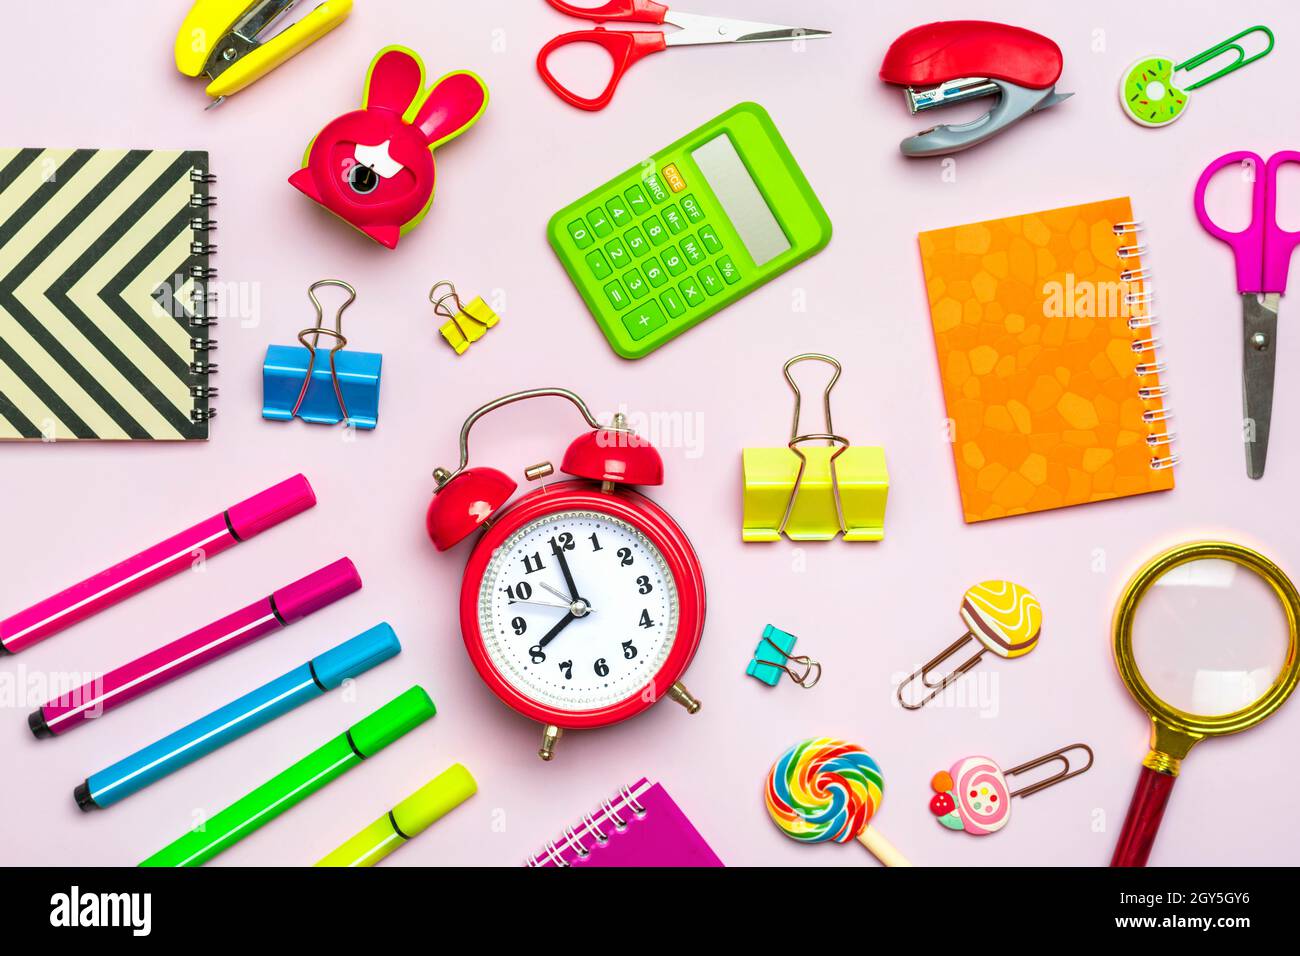 Frame from school and office supplies Paper clips, scissors, pens, felt-tip pens, sharpener, calculator, stapler isolated on pink background Flat lay Stock Photo